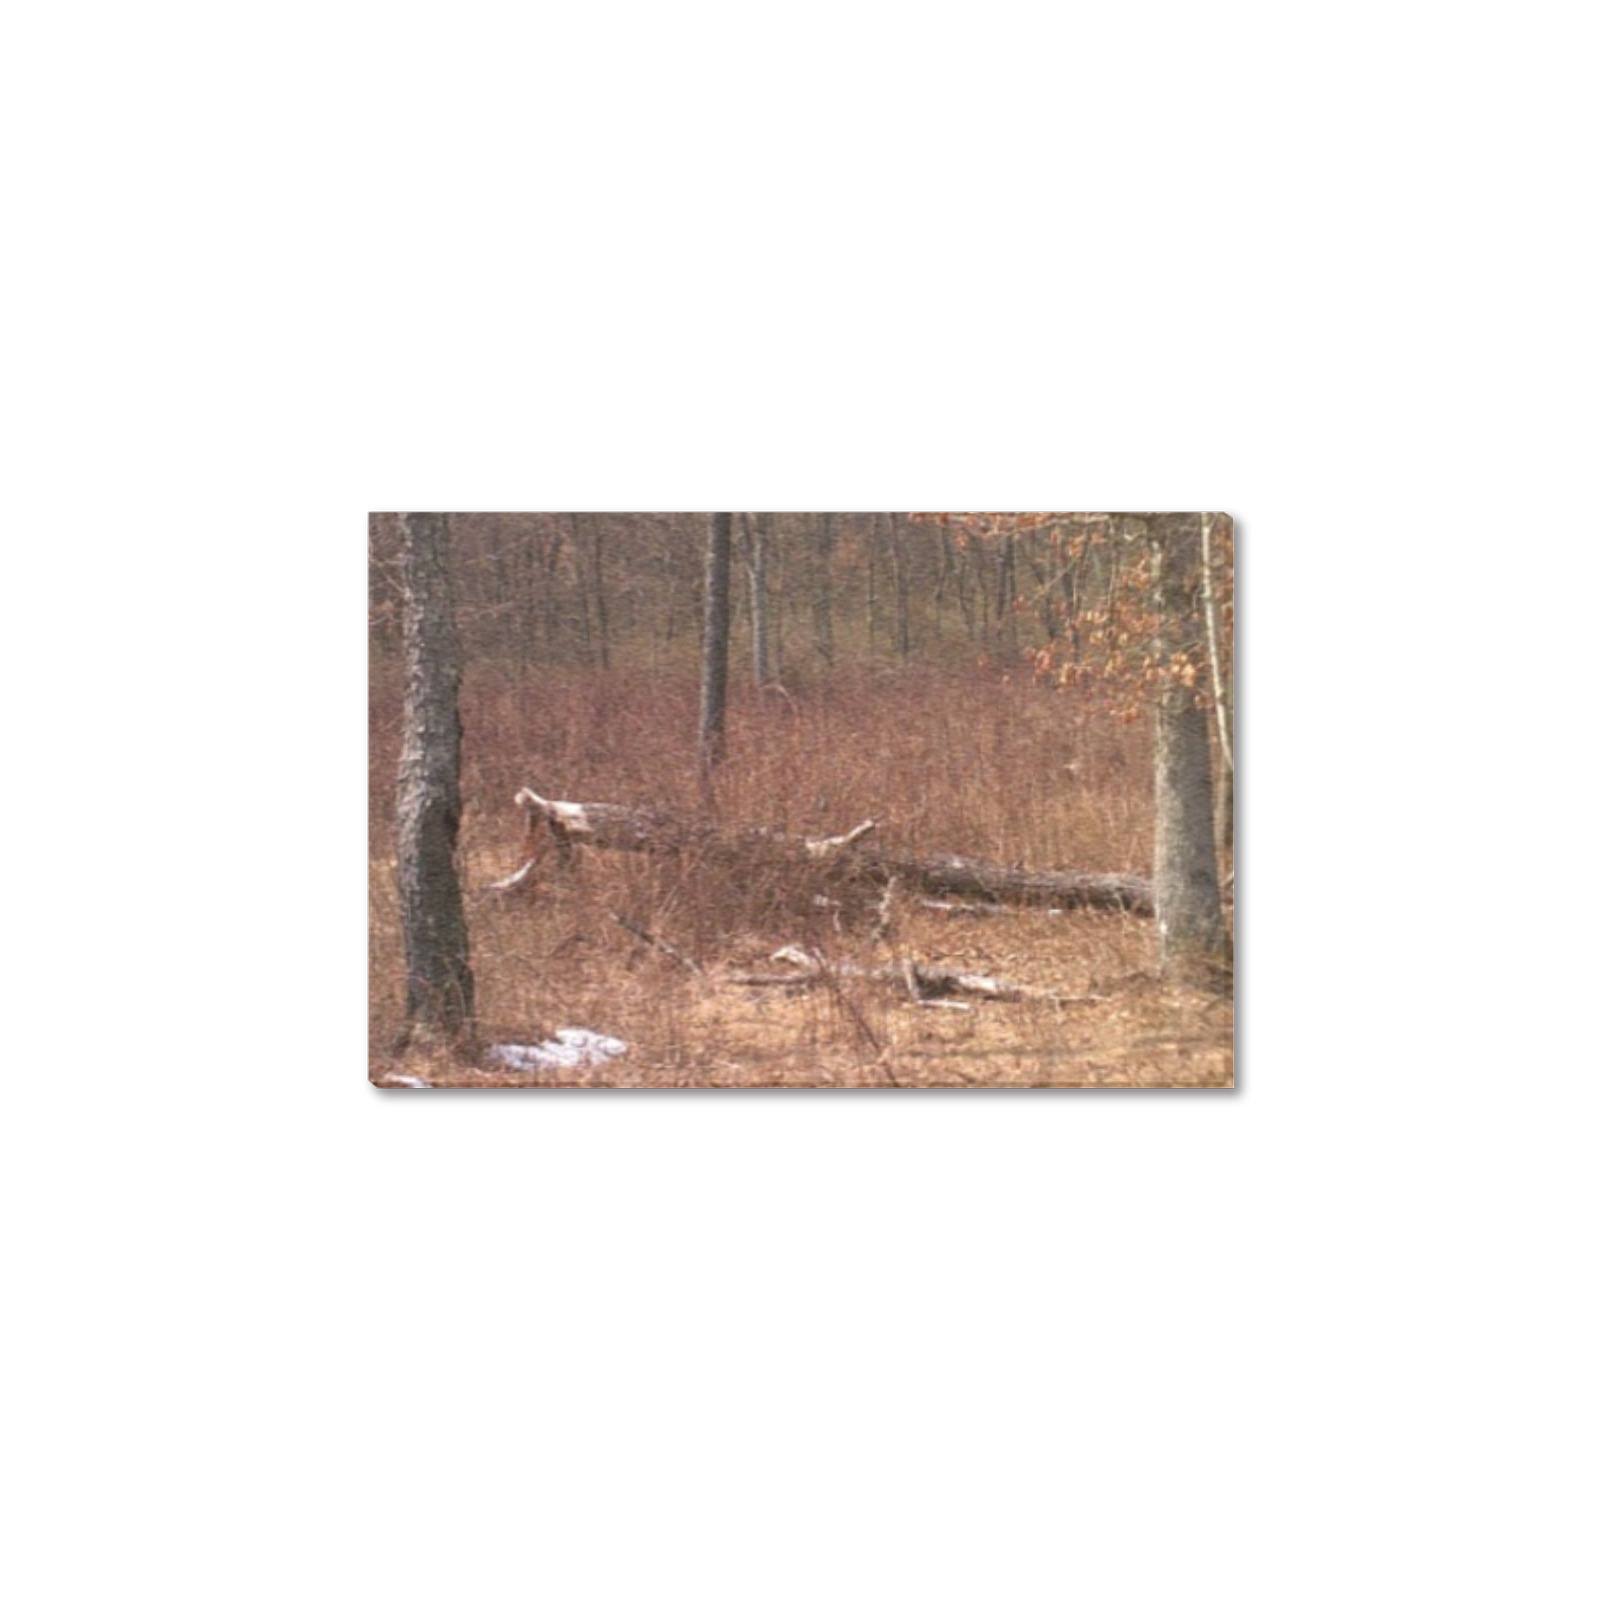 Falling tree in the woods Upgraded Canvas Print 6"x4"